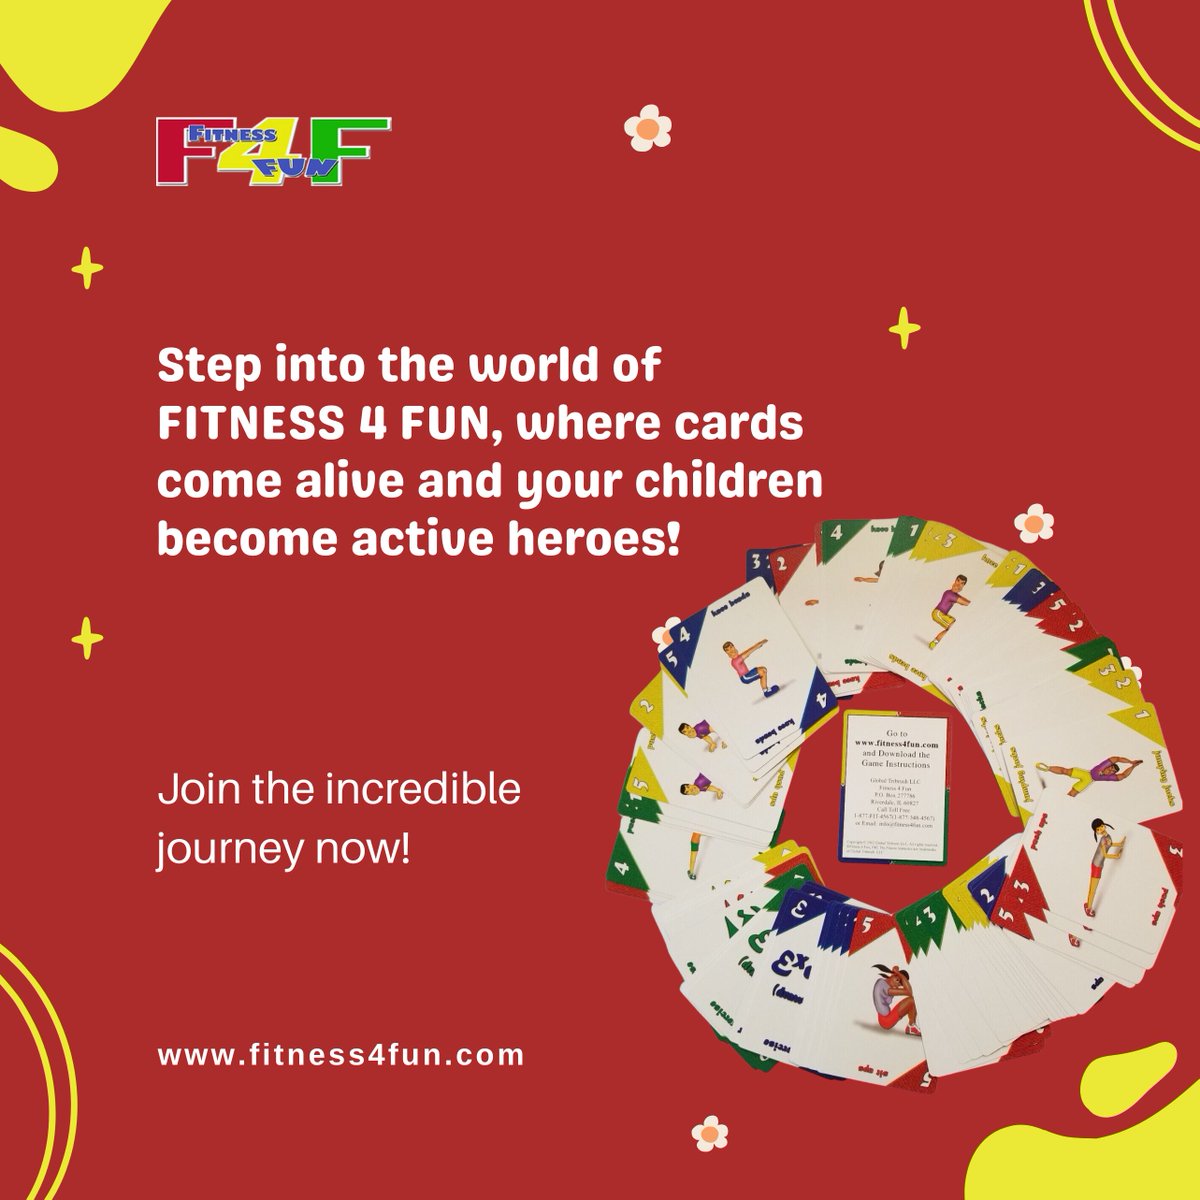 Step into the world of FITNESS 4 FUN, where cards come alive and your children become active heroes! 🃏 

Engage their imagination, boost their energy, and ignite their passion for fitness with interactive and fun-filled games. 🏃‍♂️ 

#exercise4fun2 #physicalactivity #kidsfitness